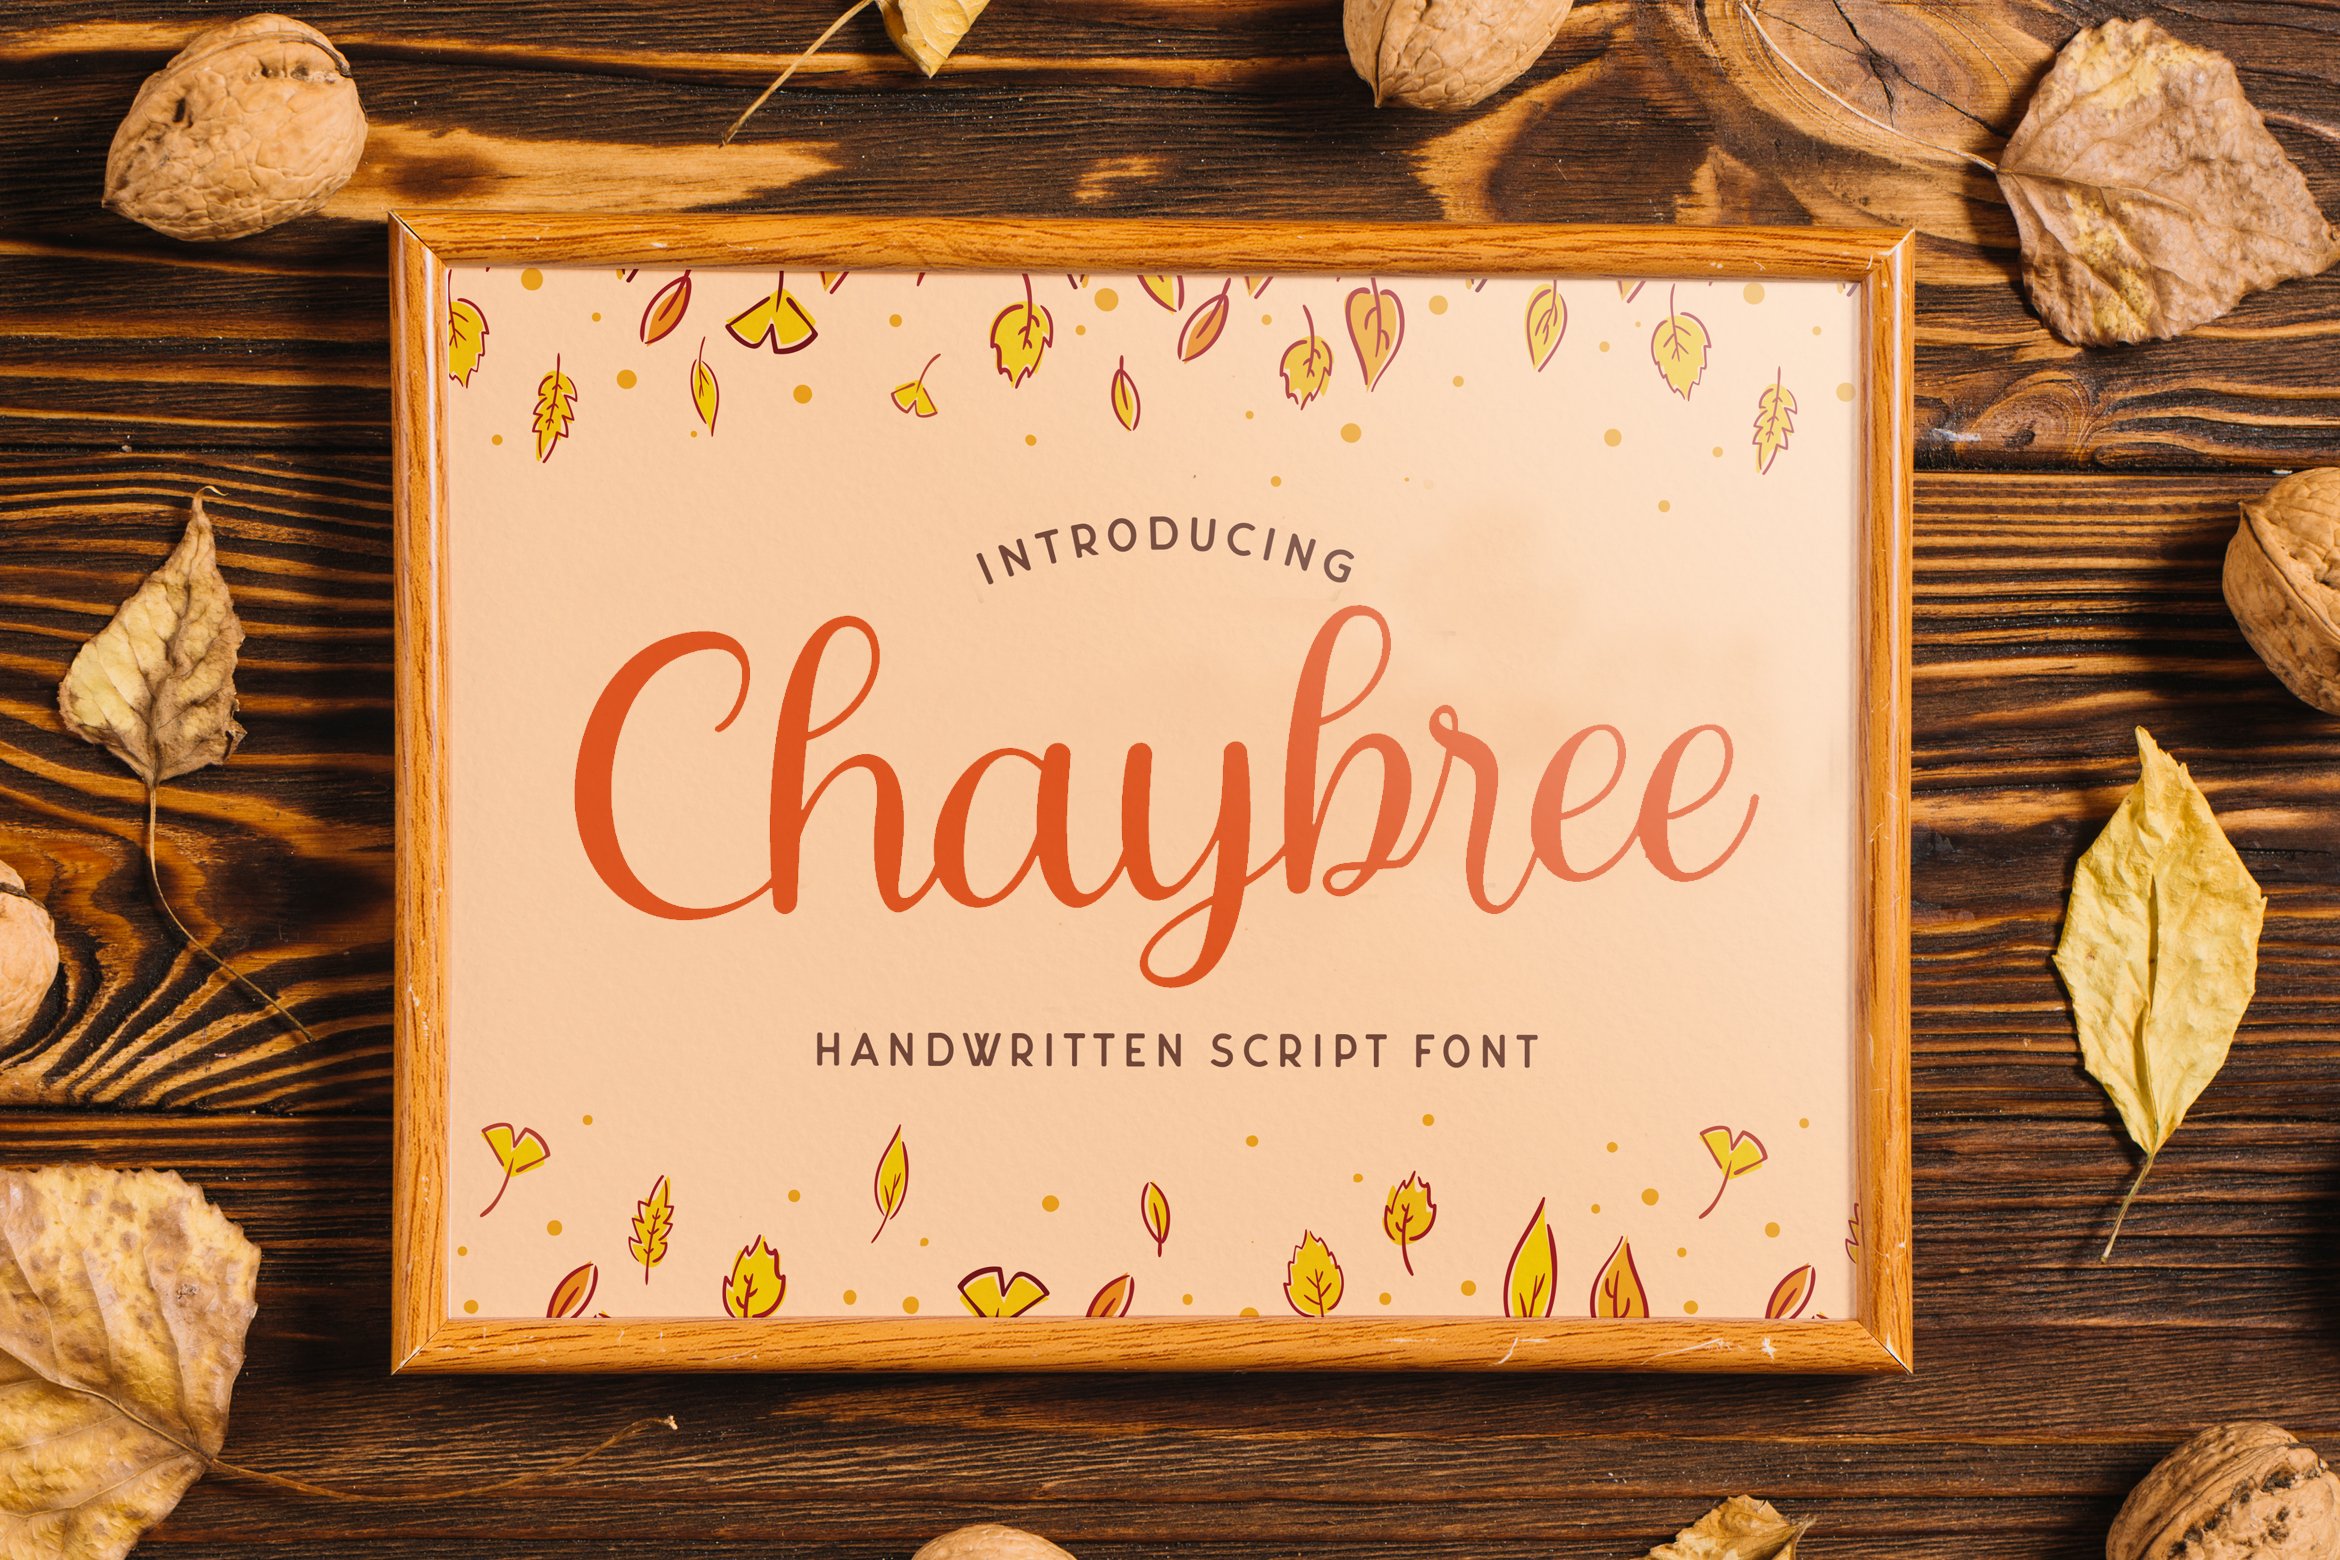 Chaybree - Handwritten Font cover image.